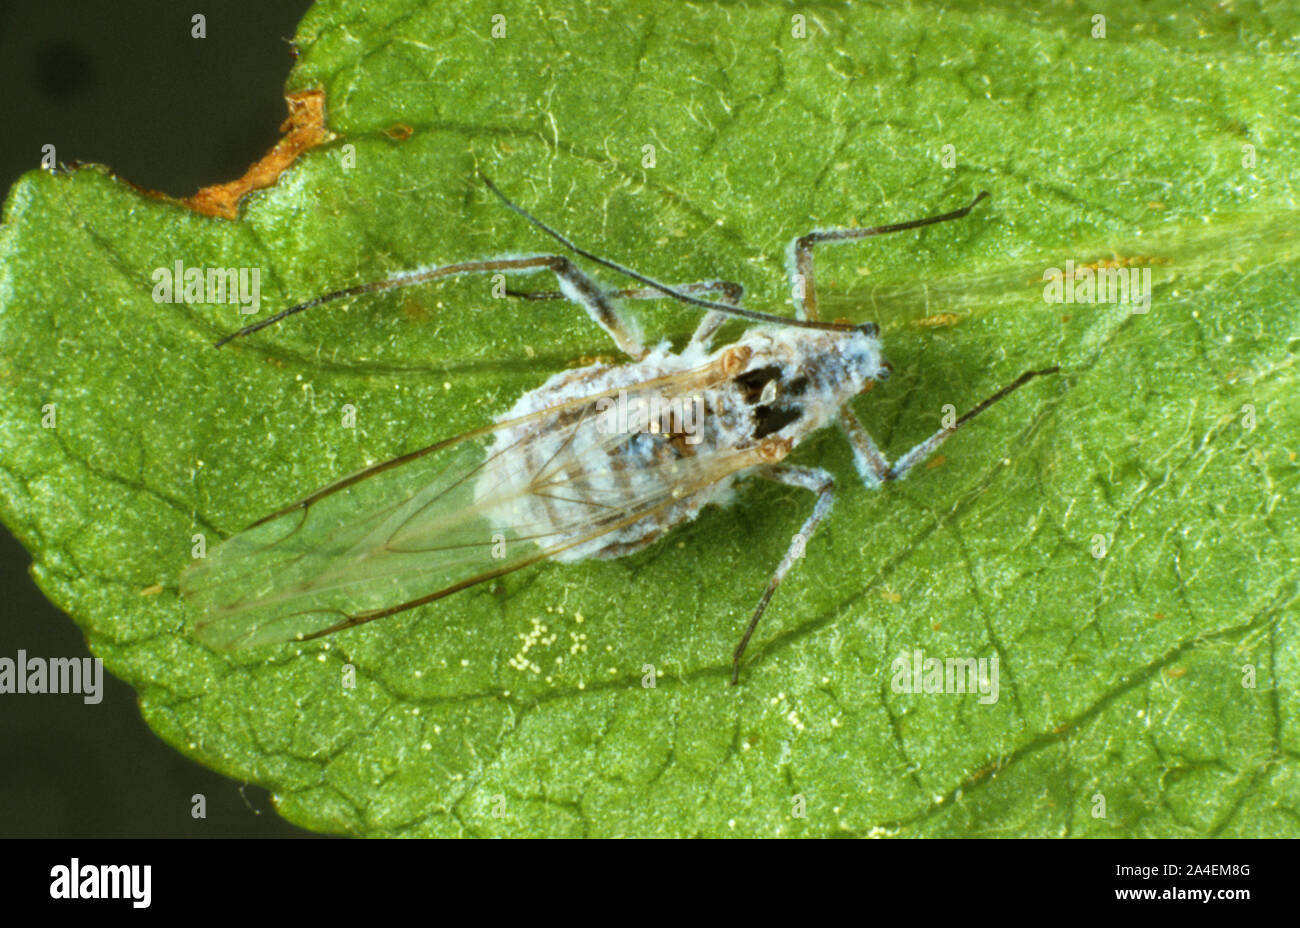 An aphid killed by an entomopathogenic fungus (Verticillium lecanii), which is used a method for biological control in protected crops. Stock Photo